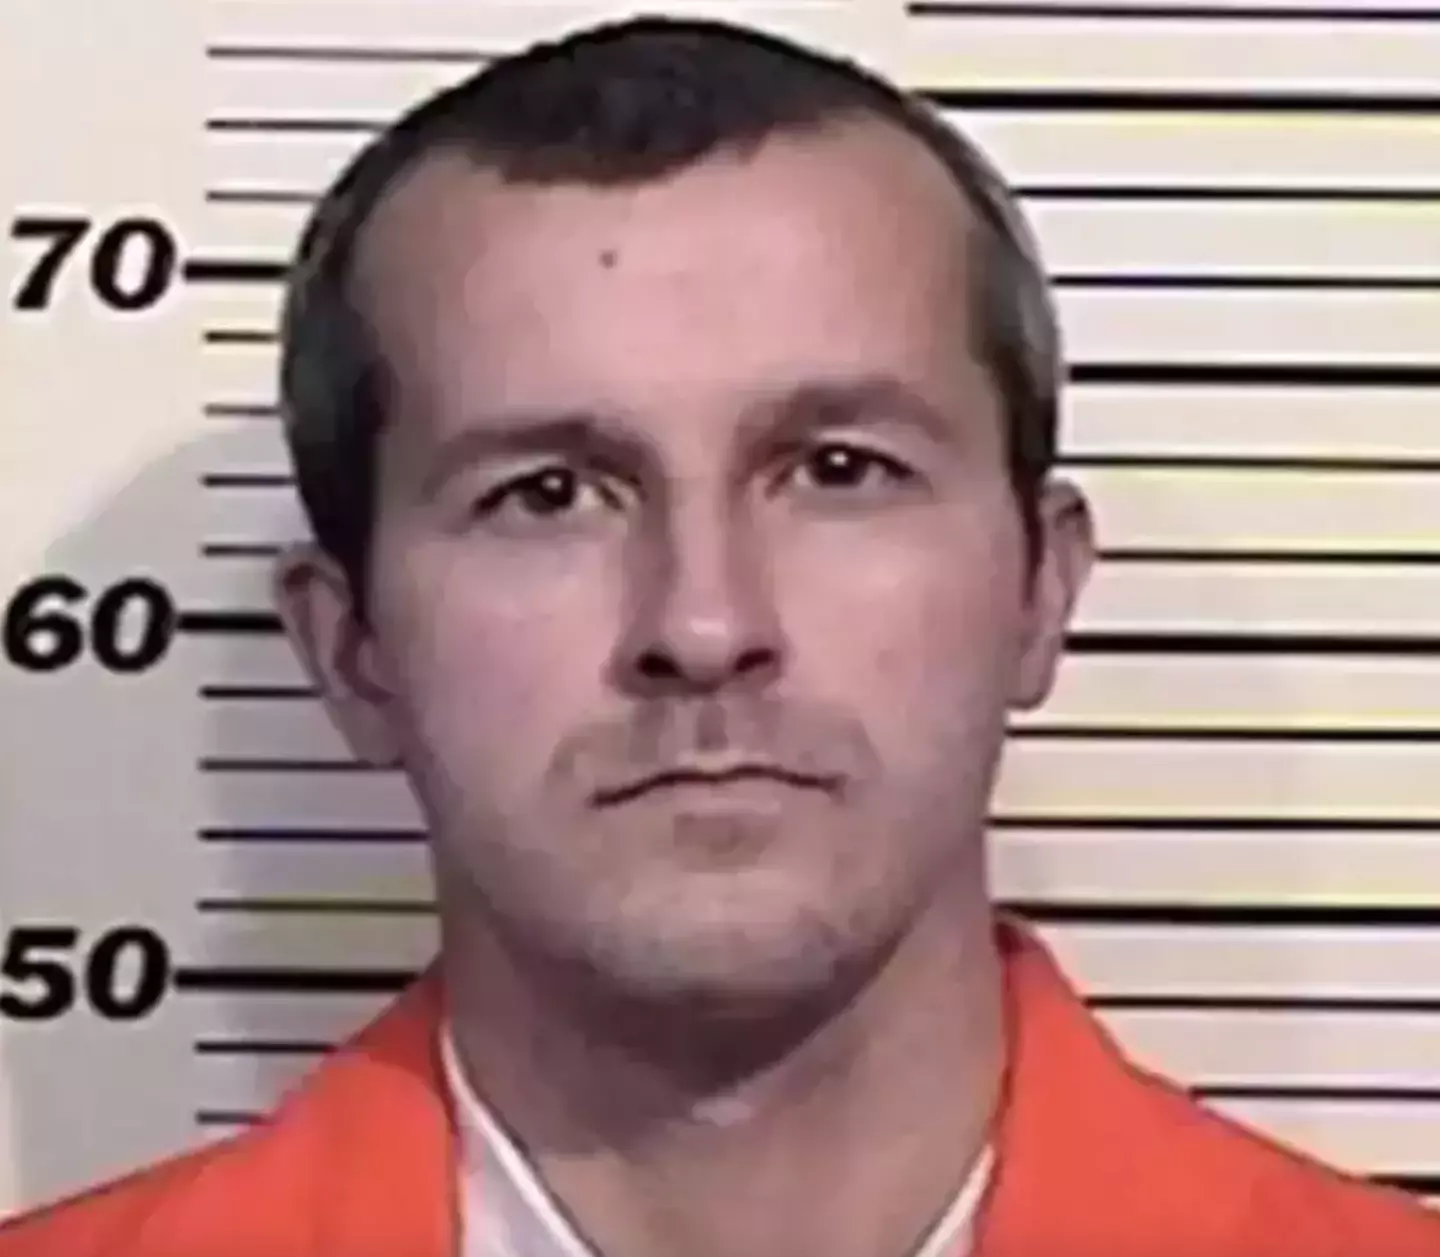 Chris Watts pleaded guilty to his family's murder.